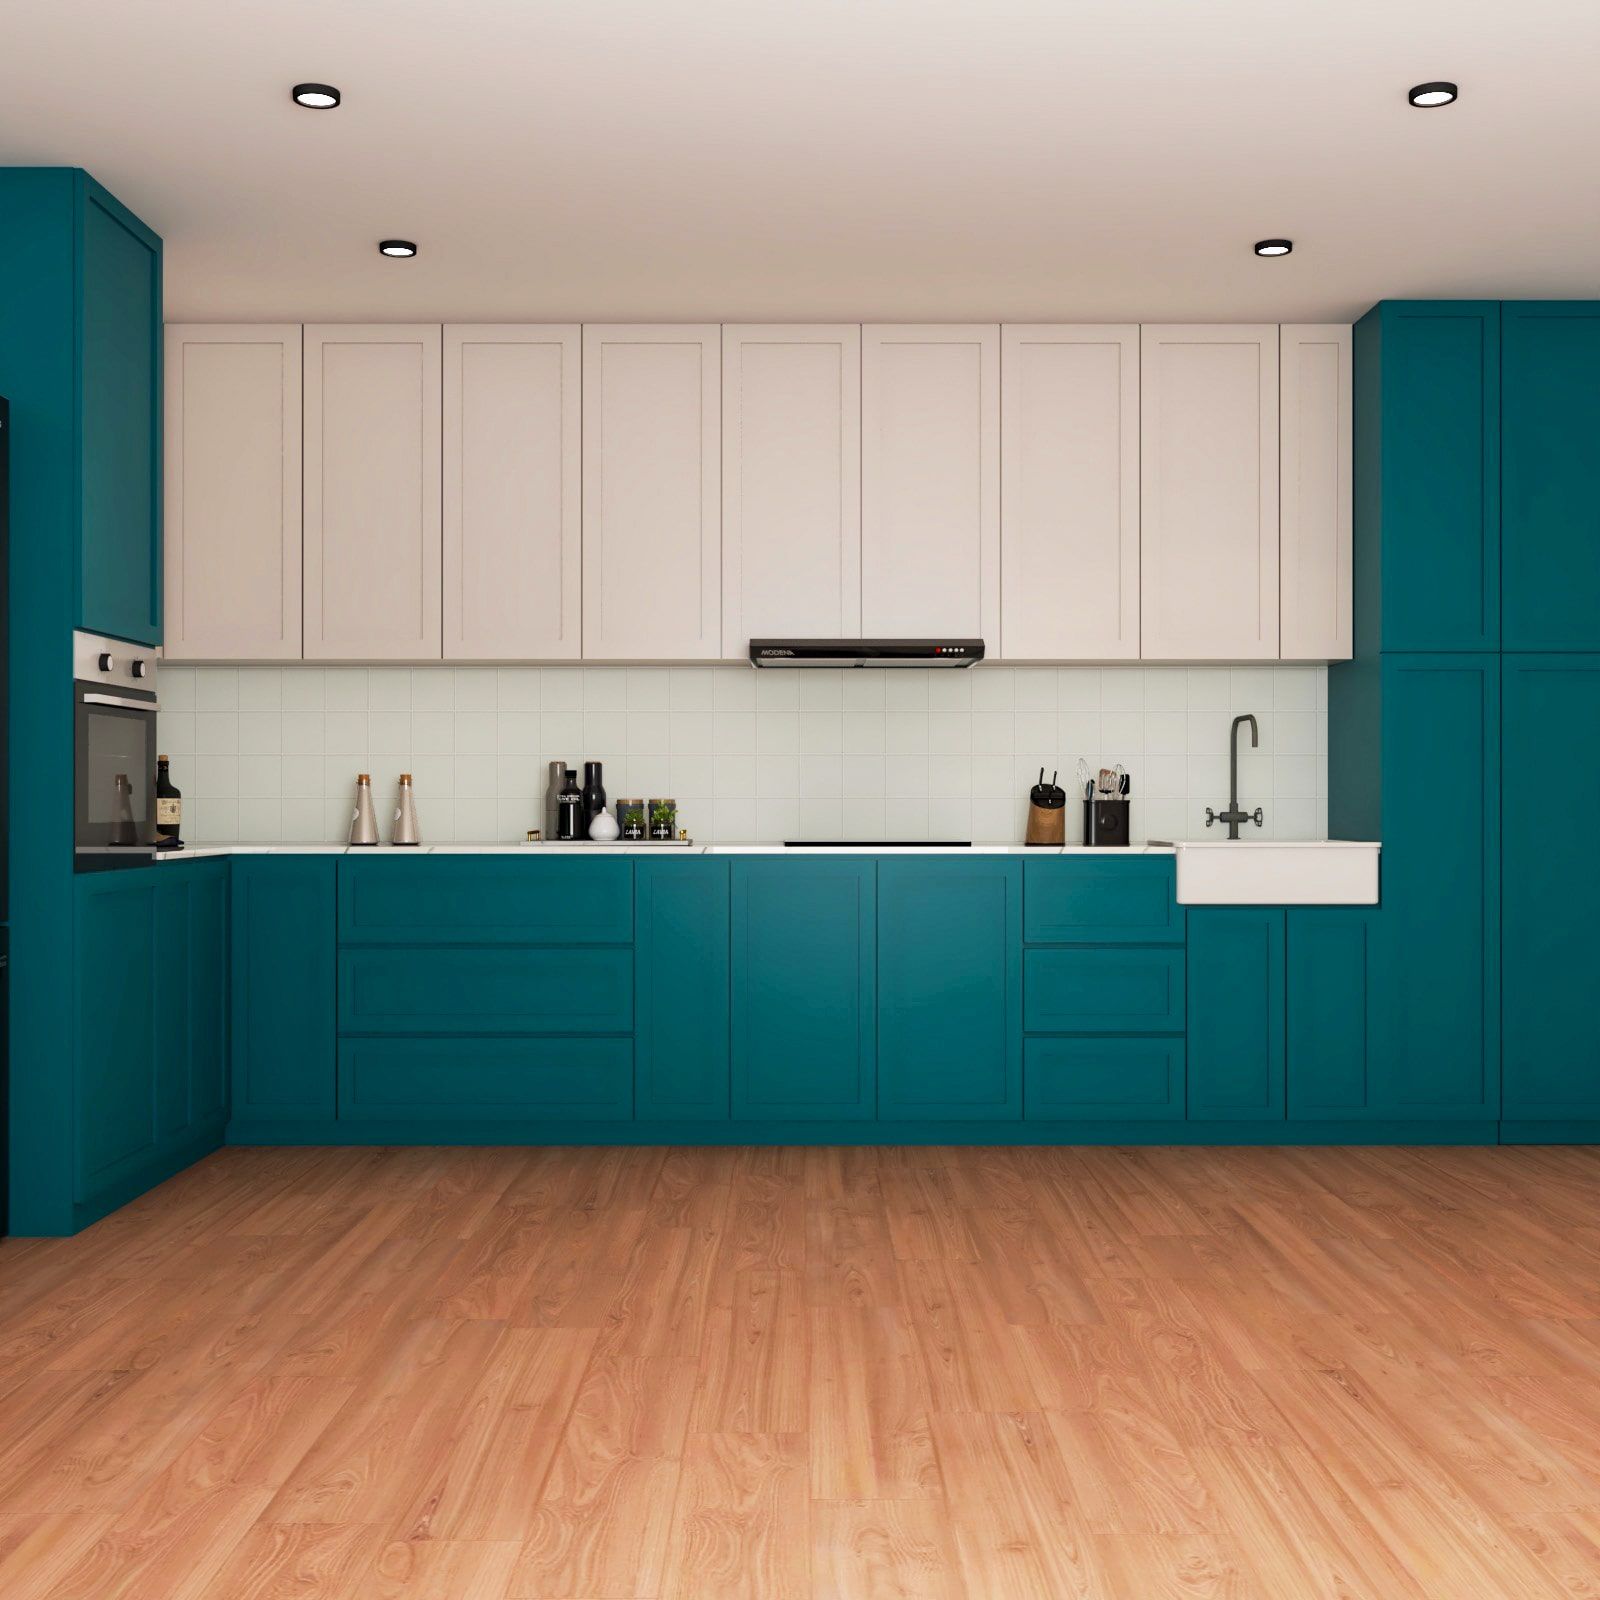 Classic L-Shaped Kitchen Cabinet Design With White And Teal Blue Profiled Shutters